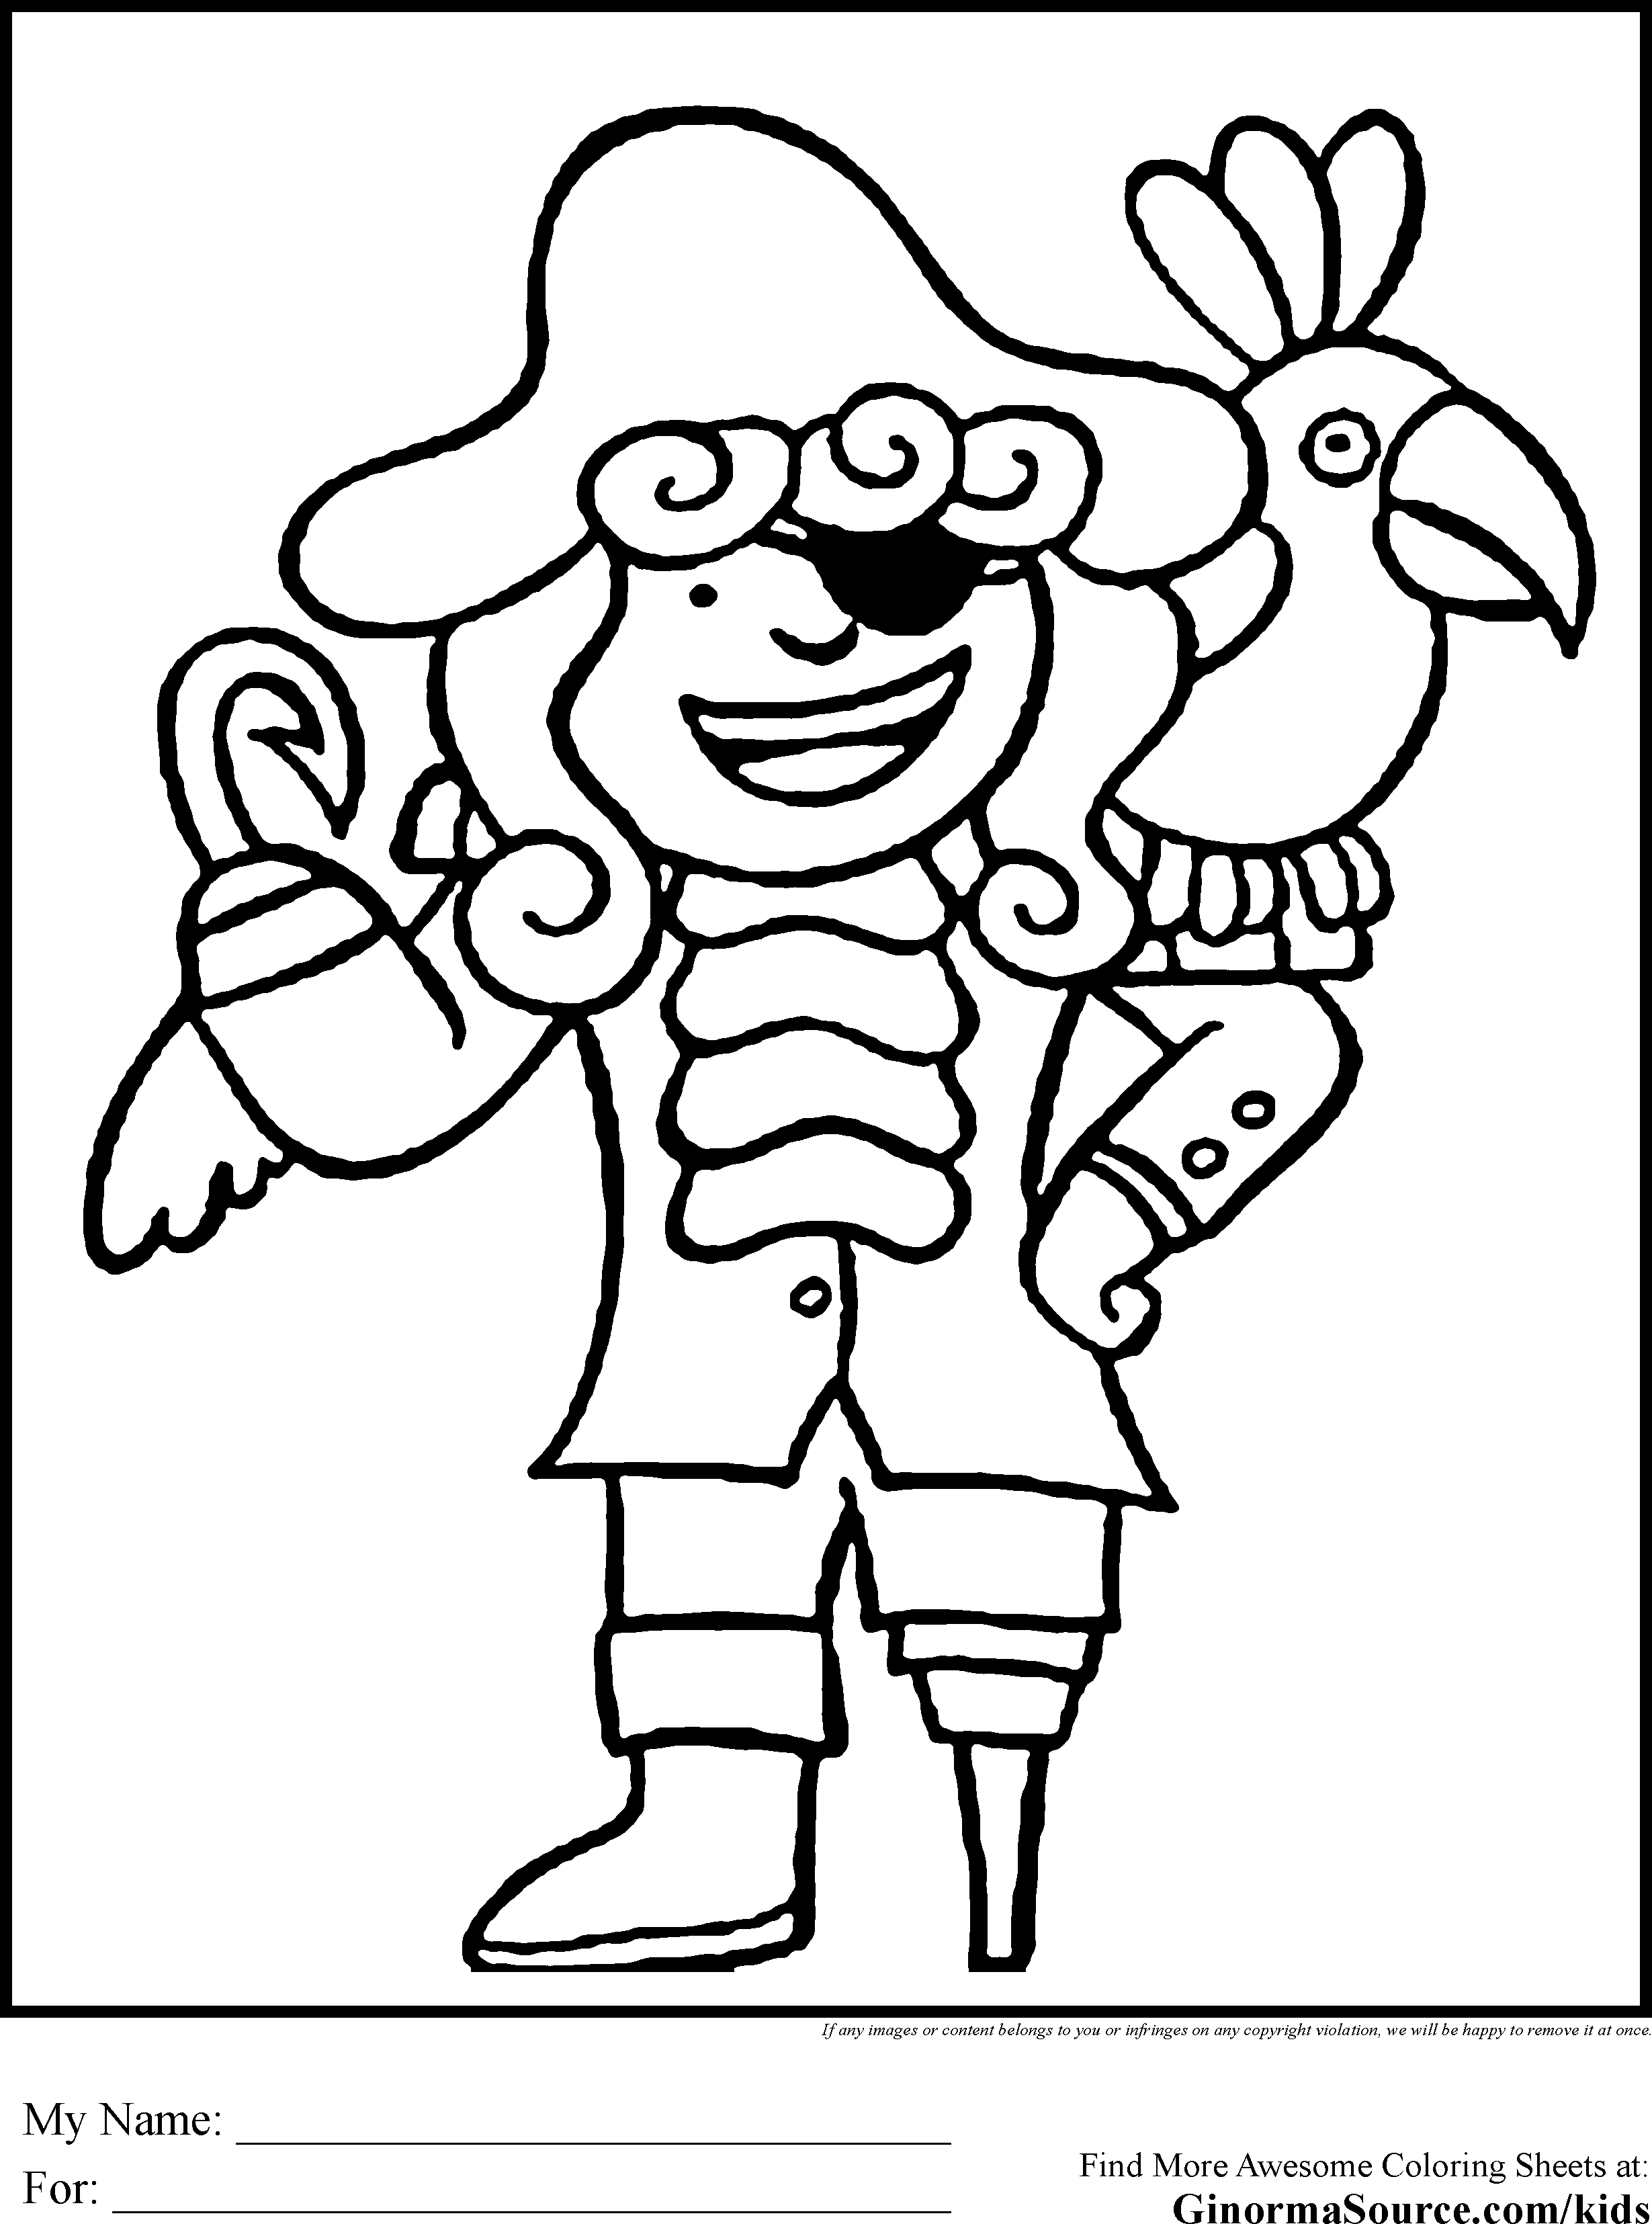 Printable Pirate Coloring Book - High Quality Coloring Pages